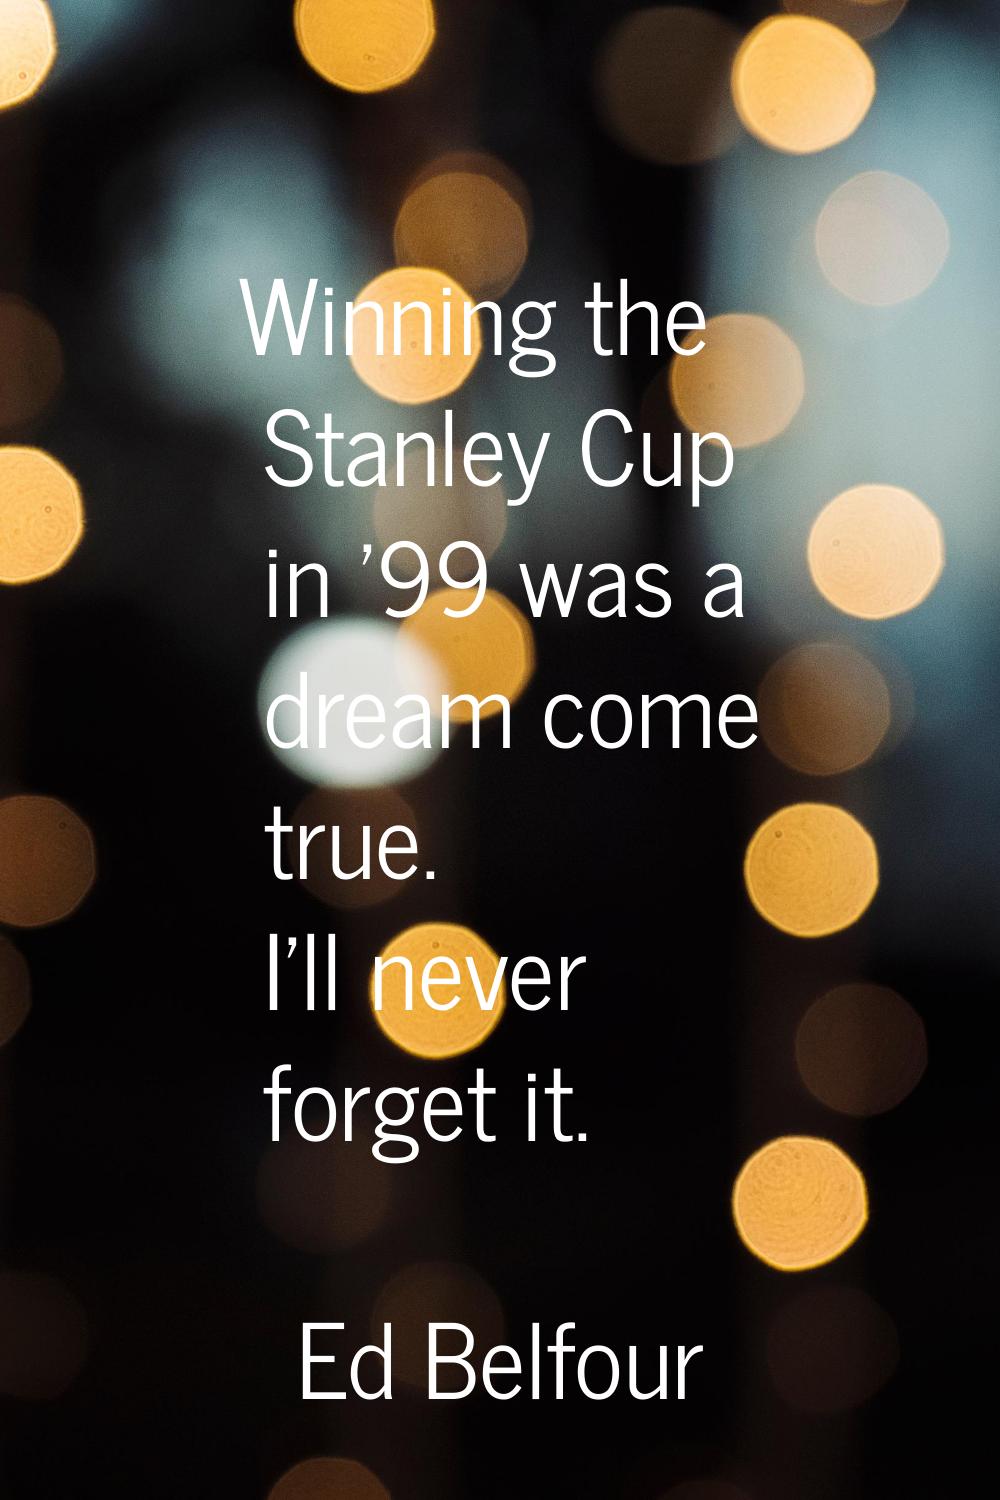 Winning the Stanley Cup in '99 was a dream come true. I'll never forget it.